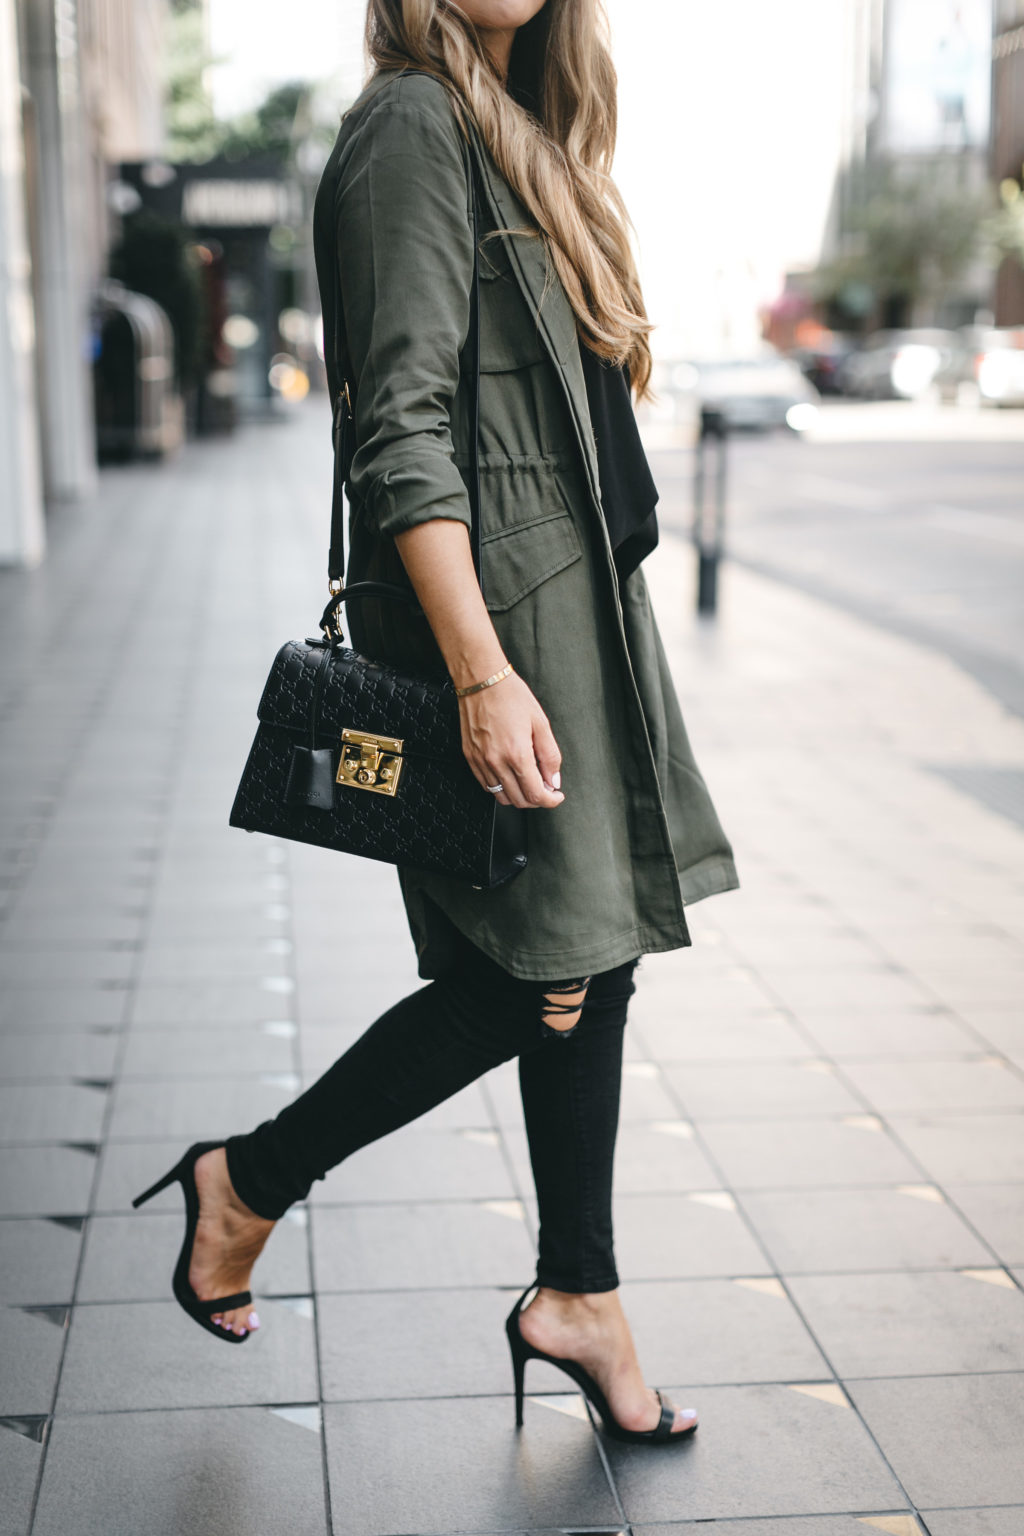 Black heels and army green trench coat